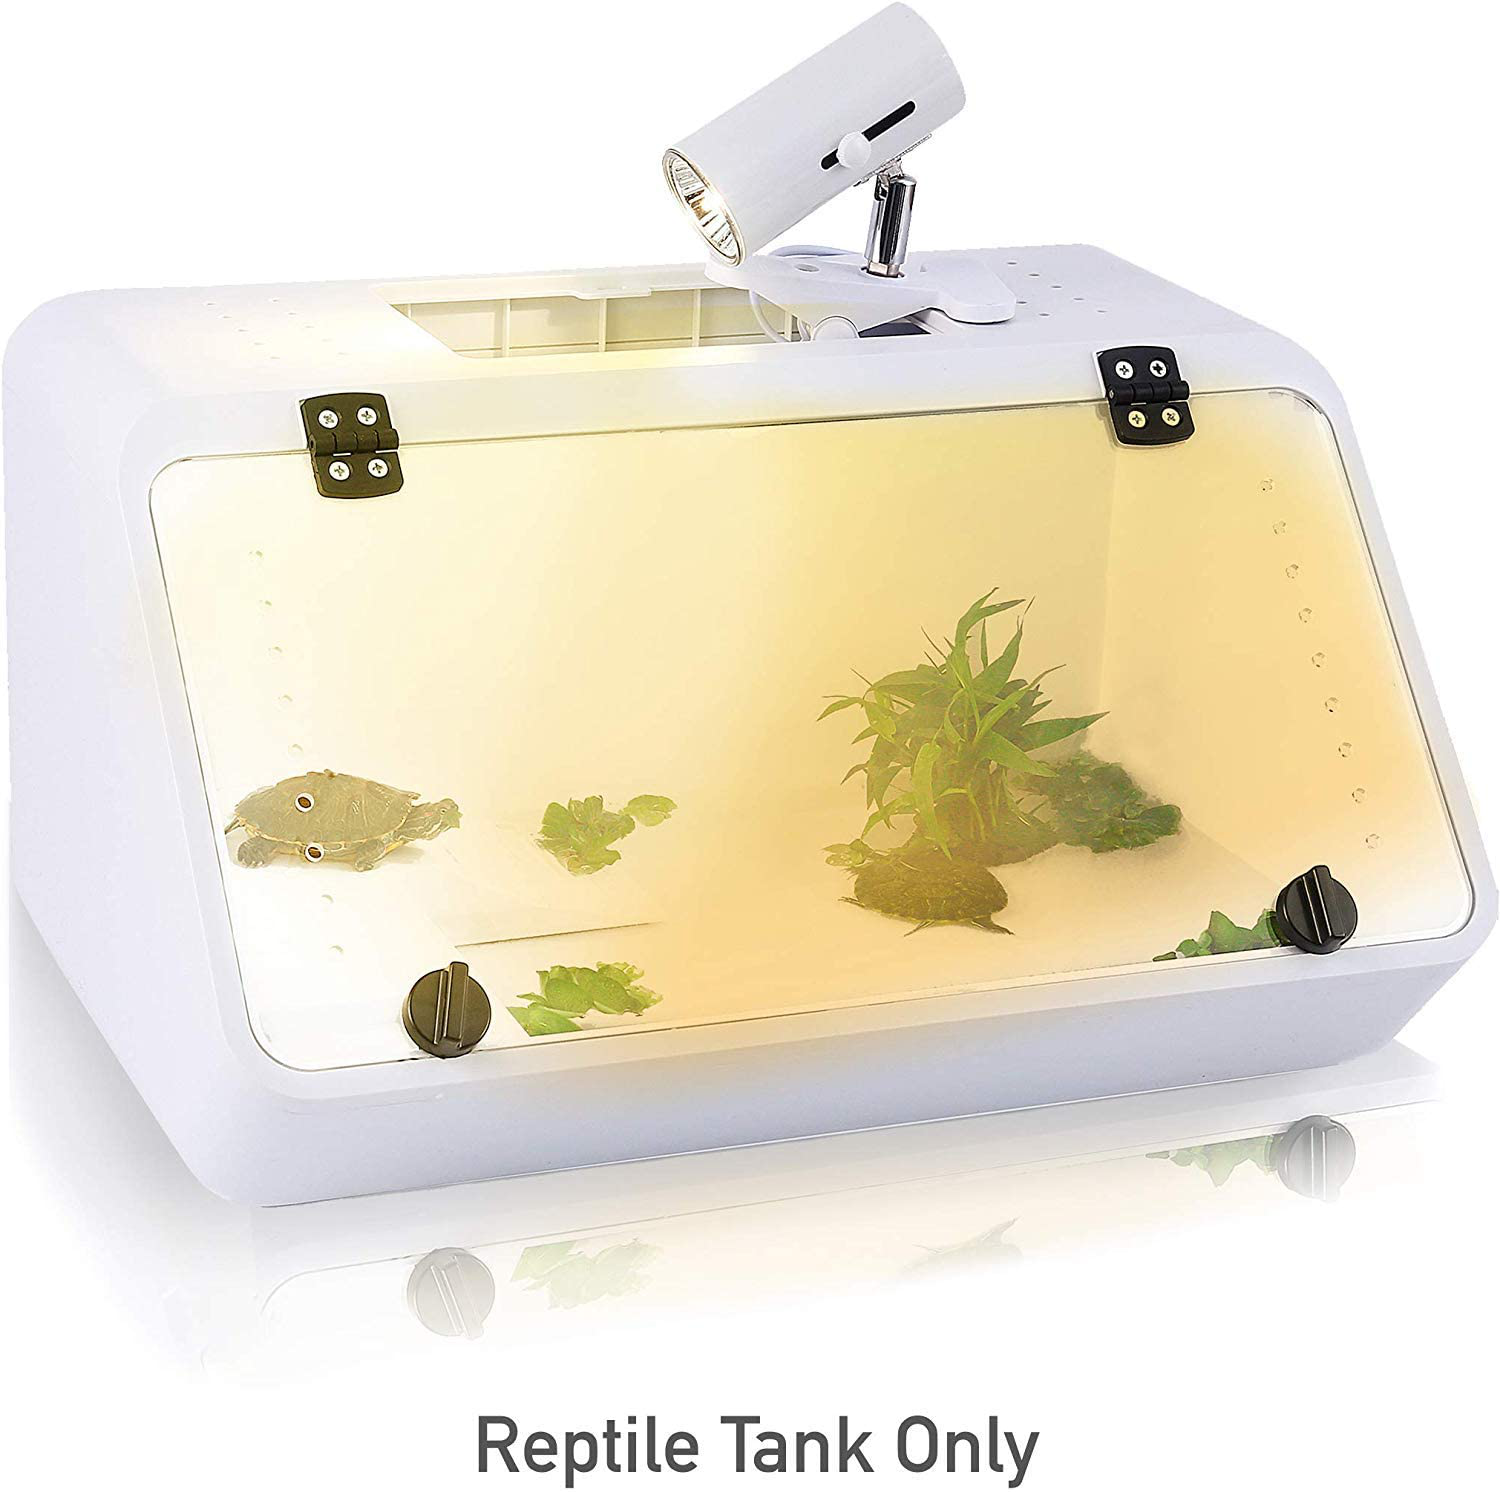 Large Reptile Tank – an Aquarium with a See-Through, Easy Access Front Panel Door | Habitat for Small Reptiles like Young Bearded Dragons, Lizards, Small Snakes and More |19''X10''X10'' with Food Tray Animals & Pet Supplies > Pet Supplies > Reptile & Amphibian Supplies > Reptile & Amphibian Habitat Accessories CALPALMY   